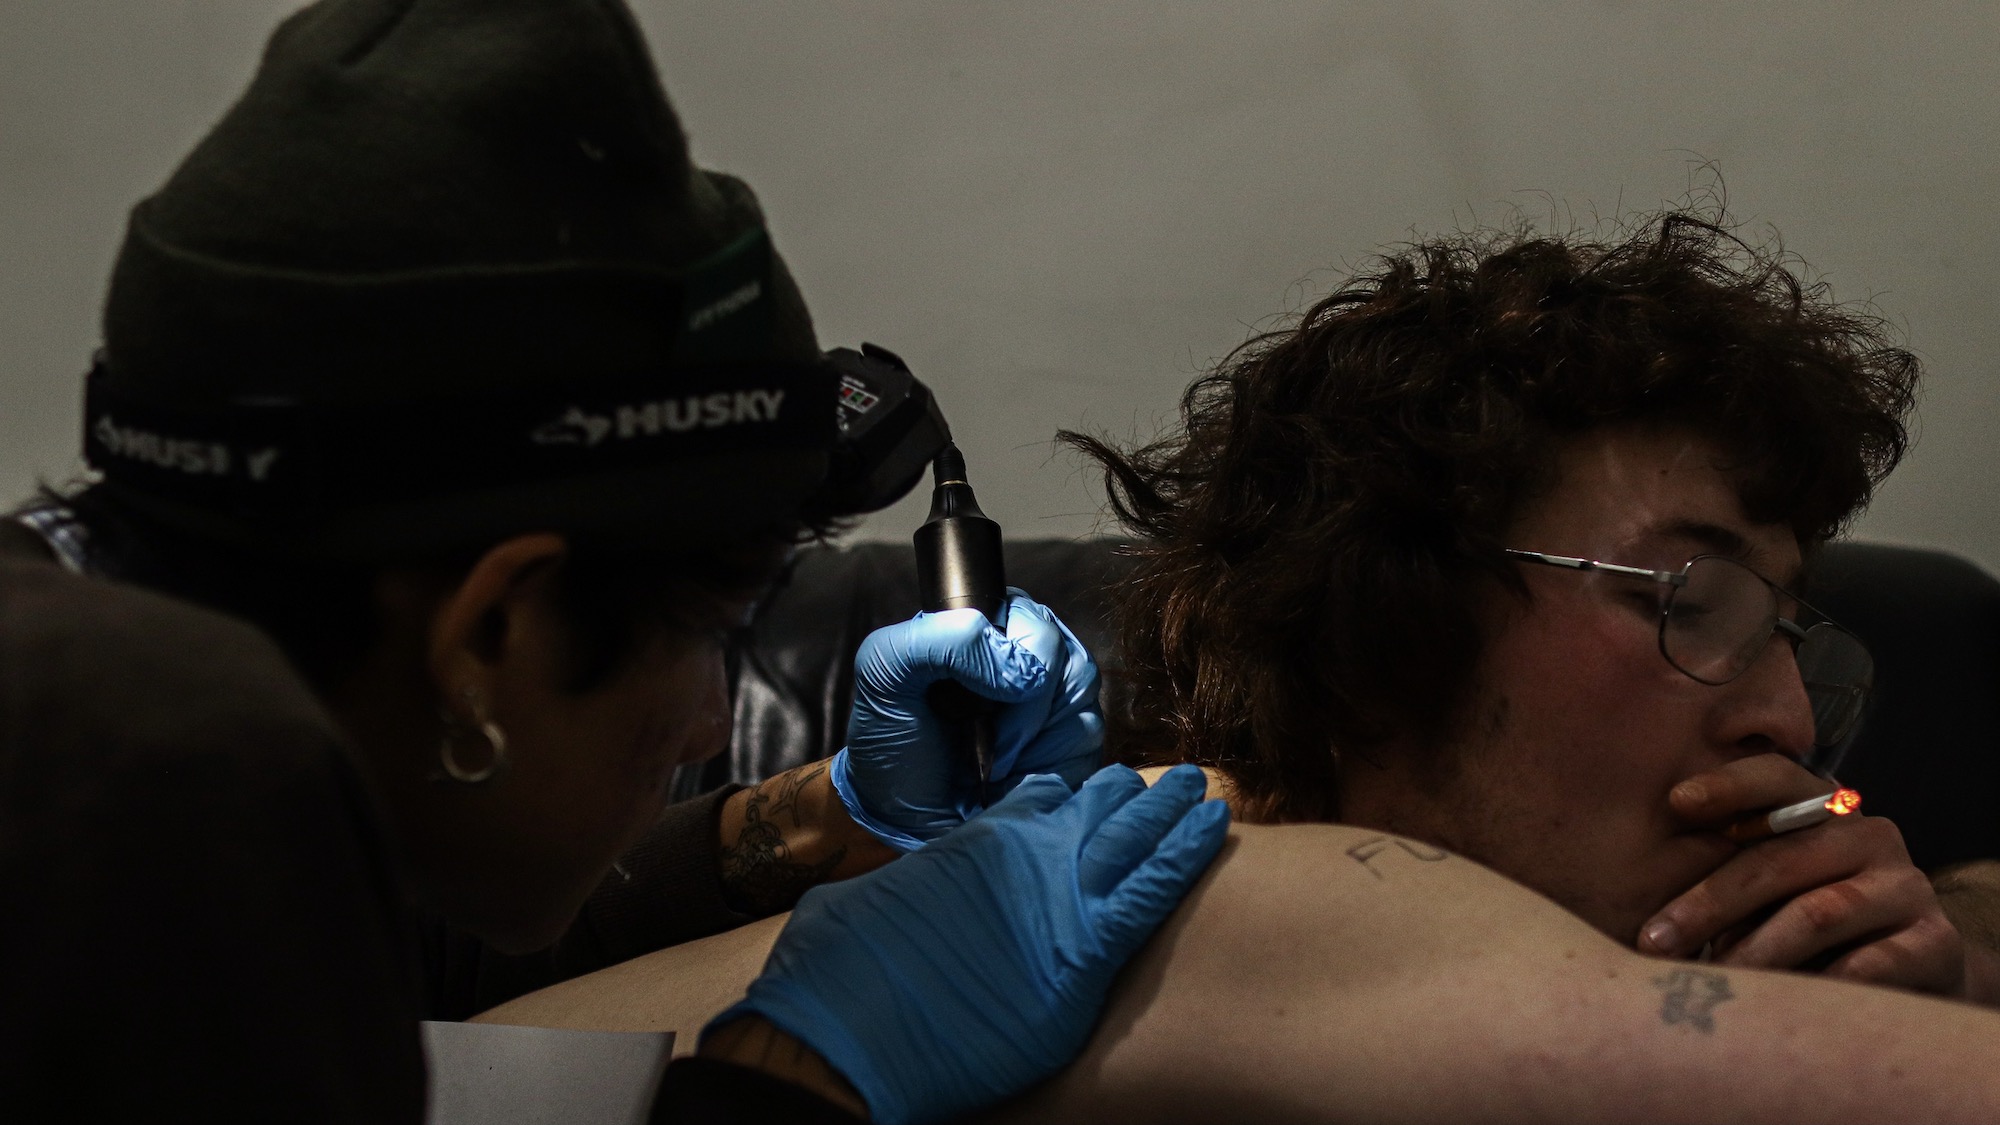 A man tattooing another man